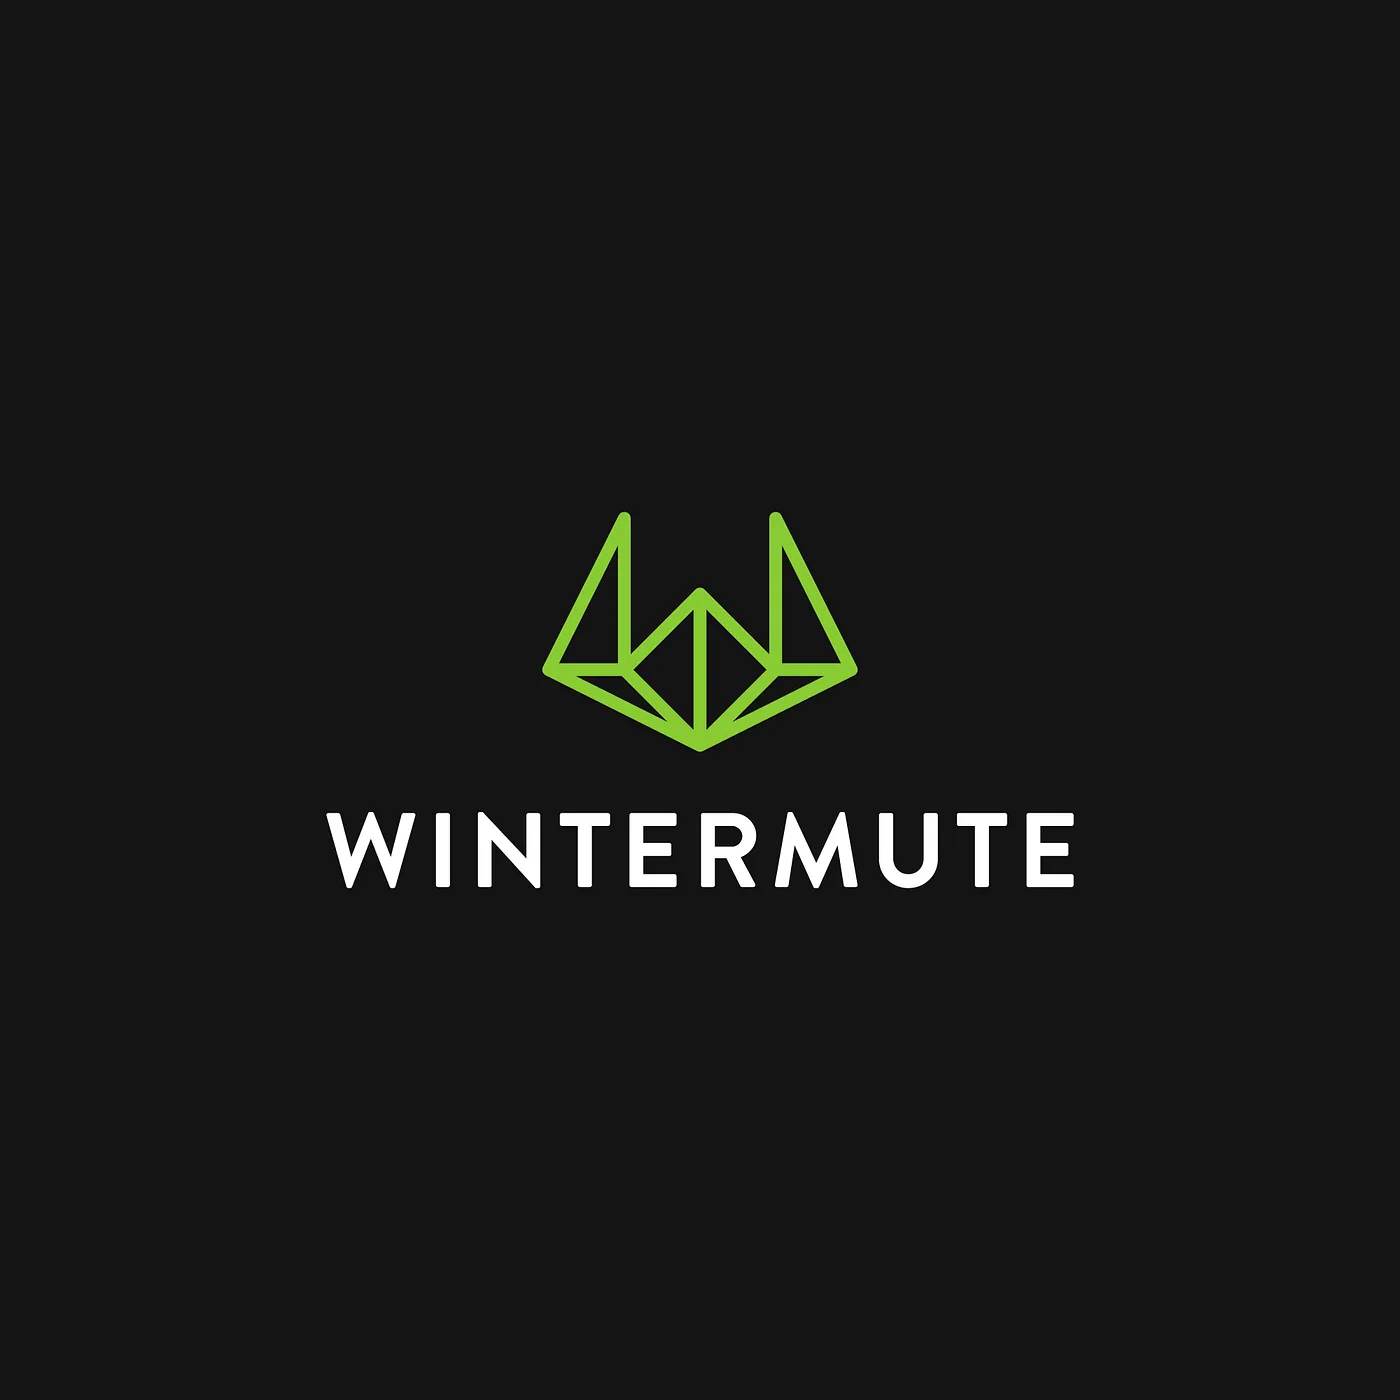 Wintermute makes sure you don’t get ripped off when you buy crypto.